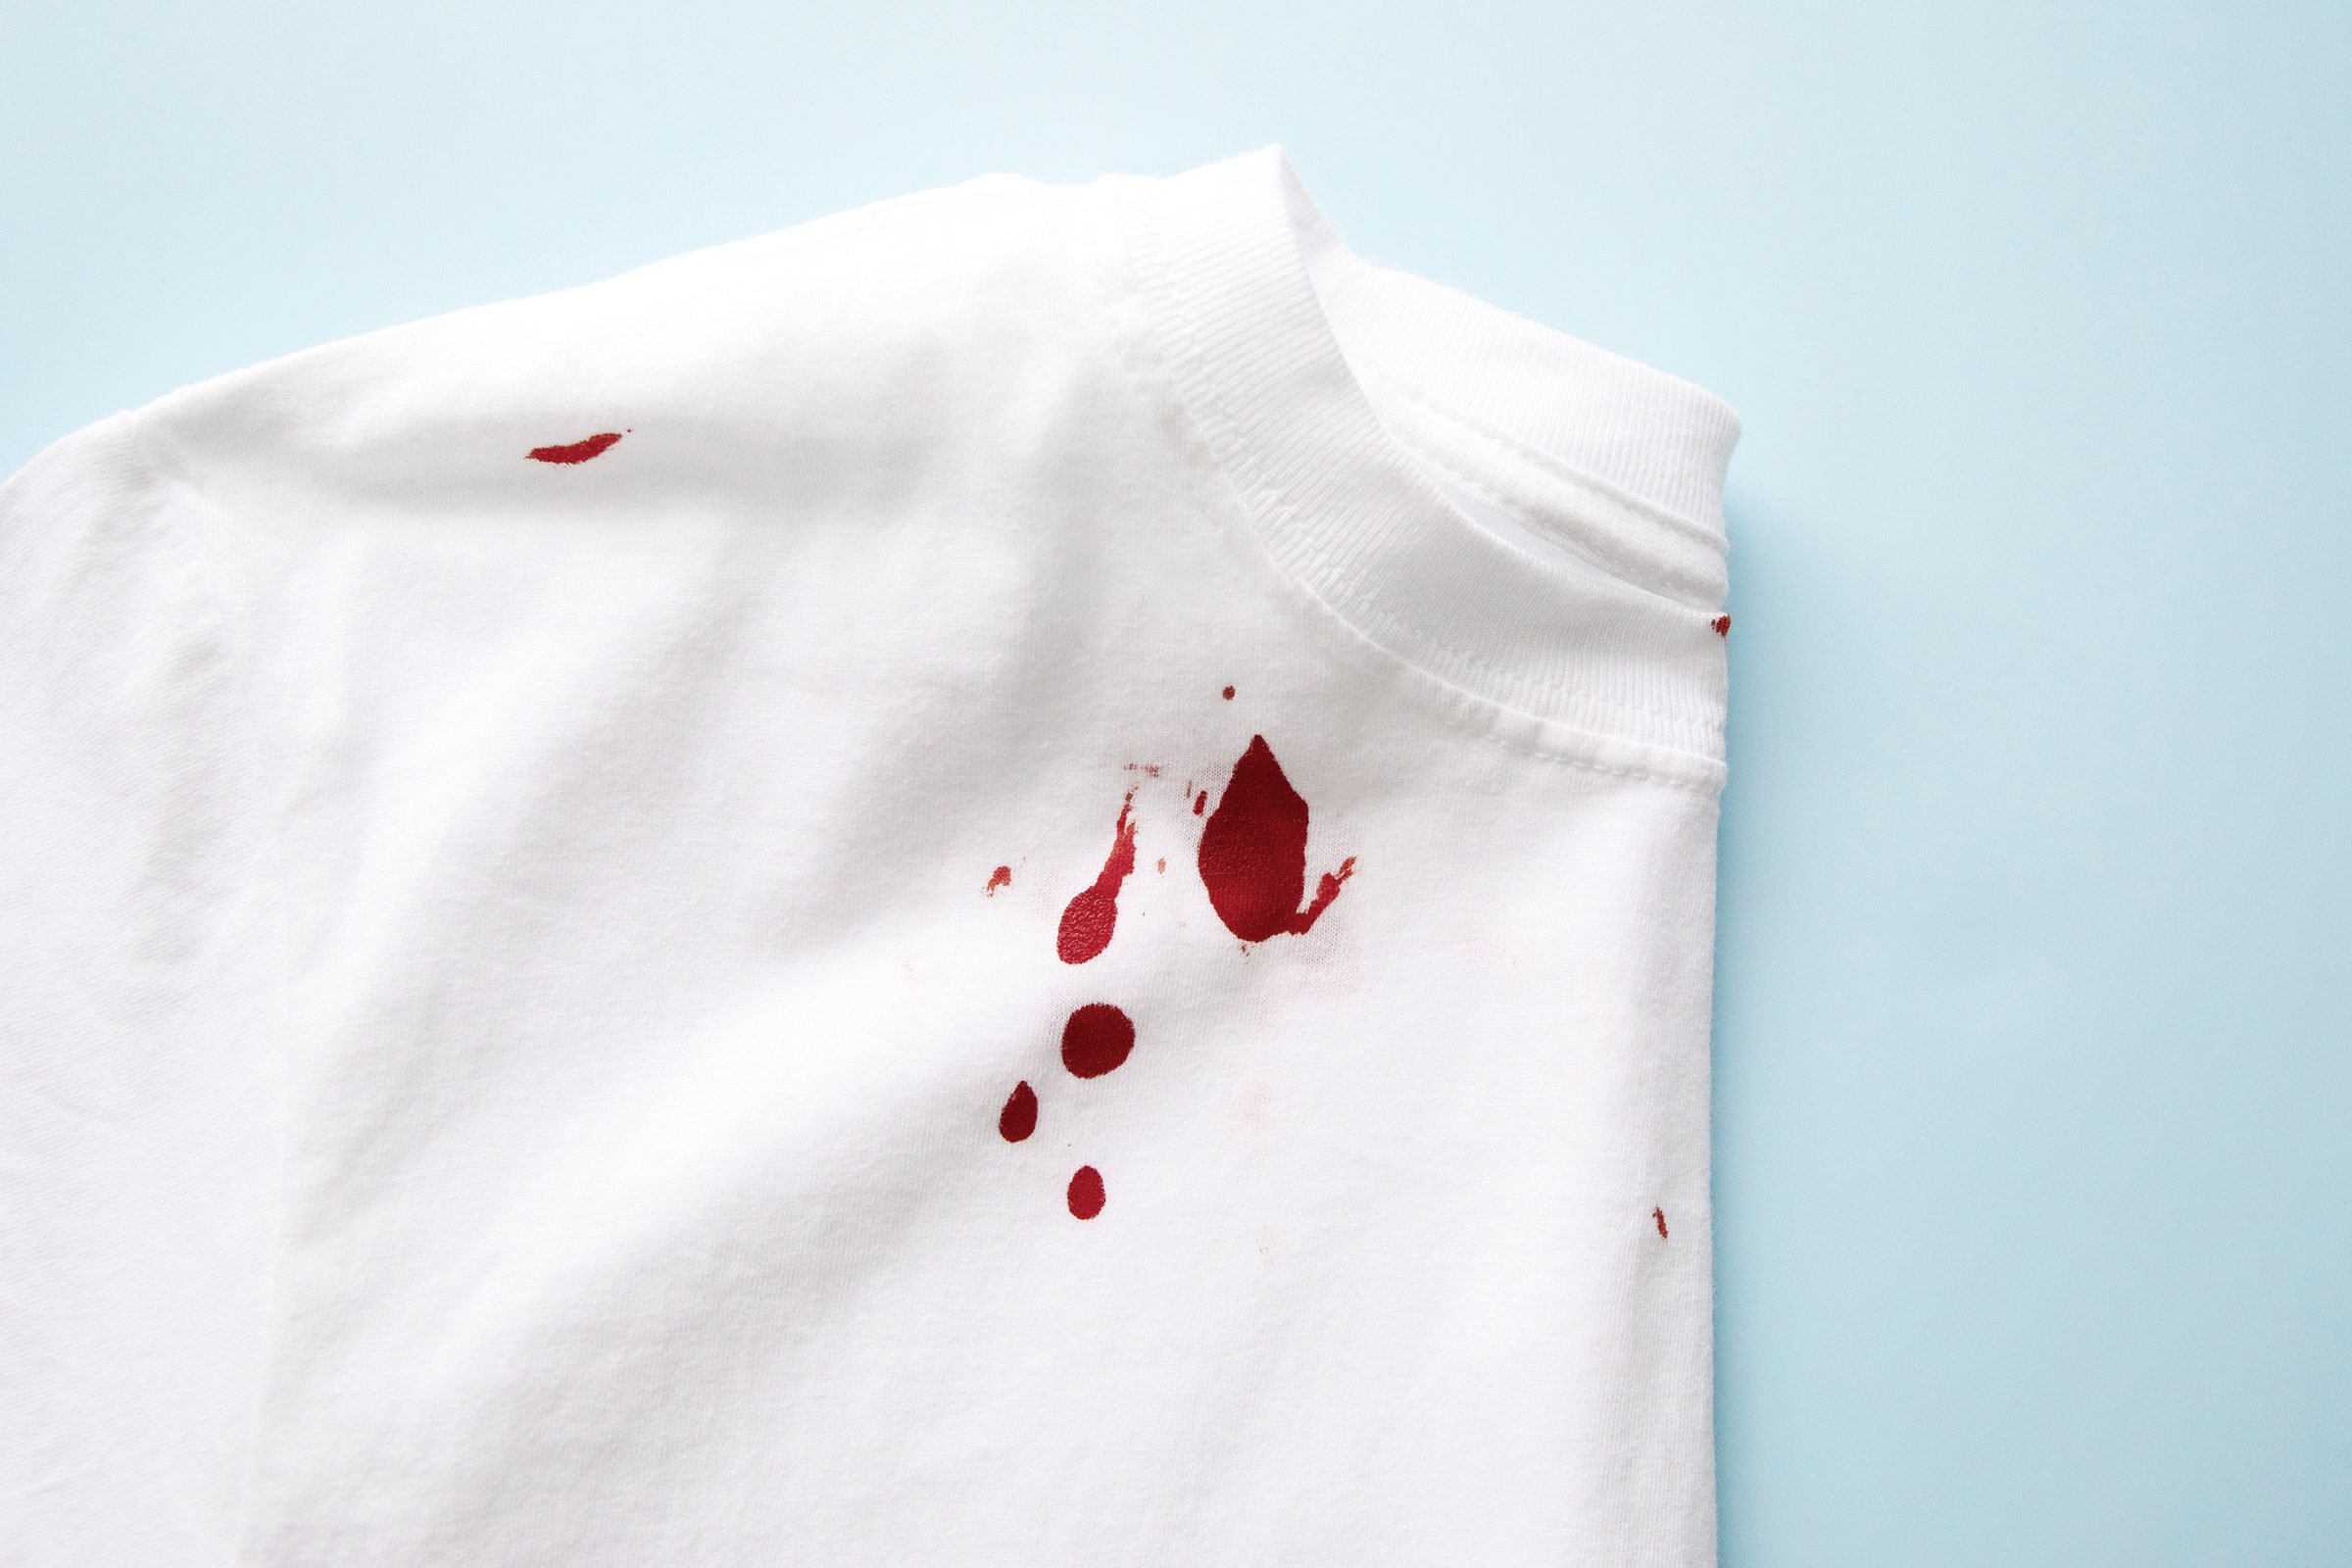 7 Best Blood stain removal ideas  blood stains, blood stain removal,  cleaning hacks